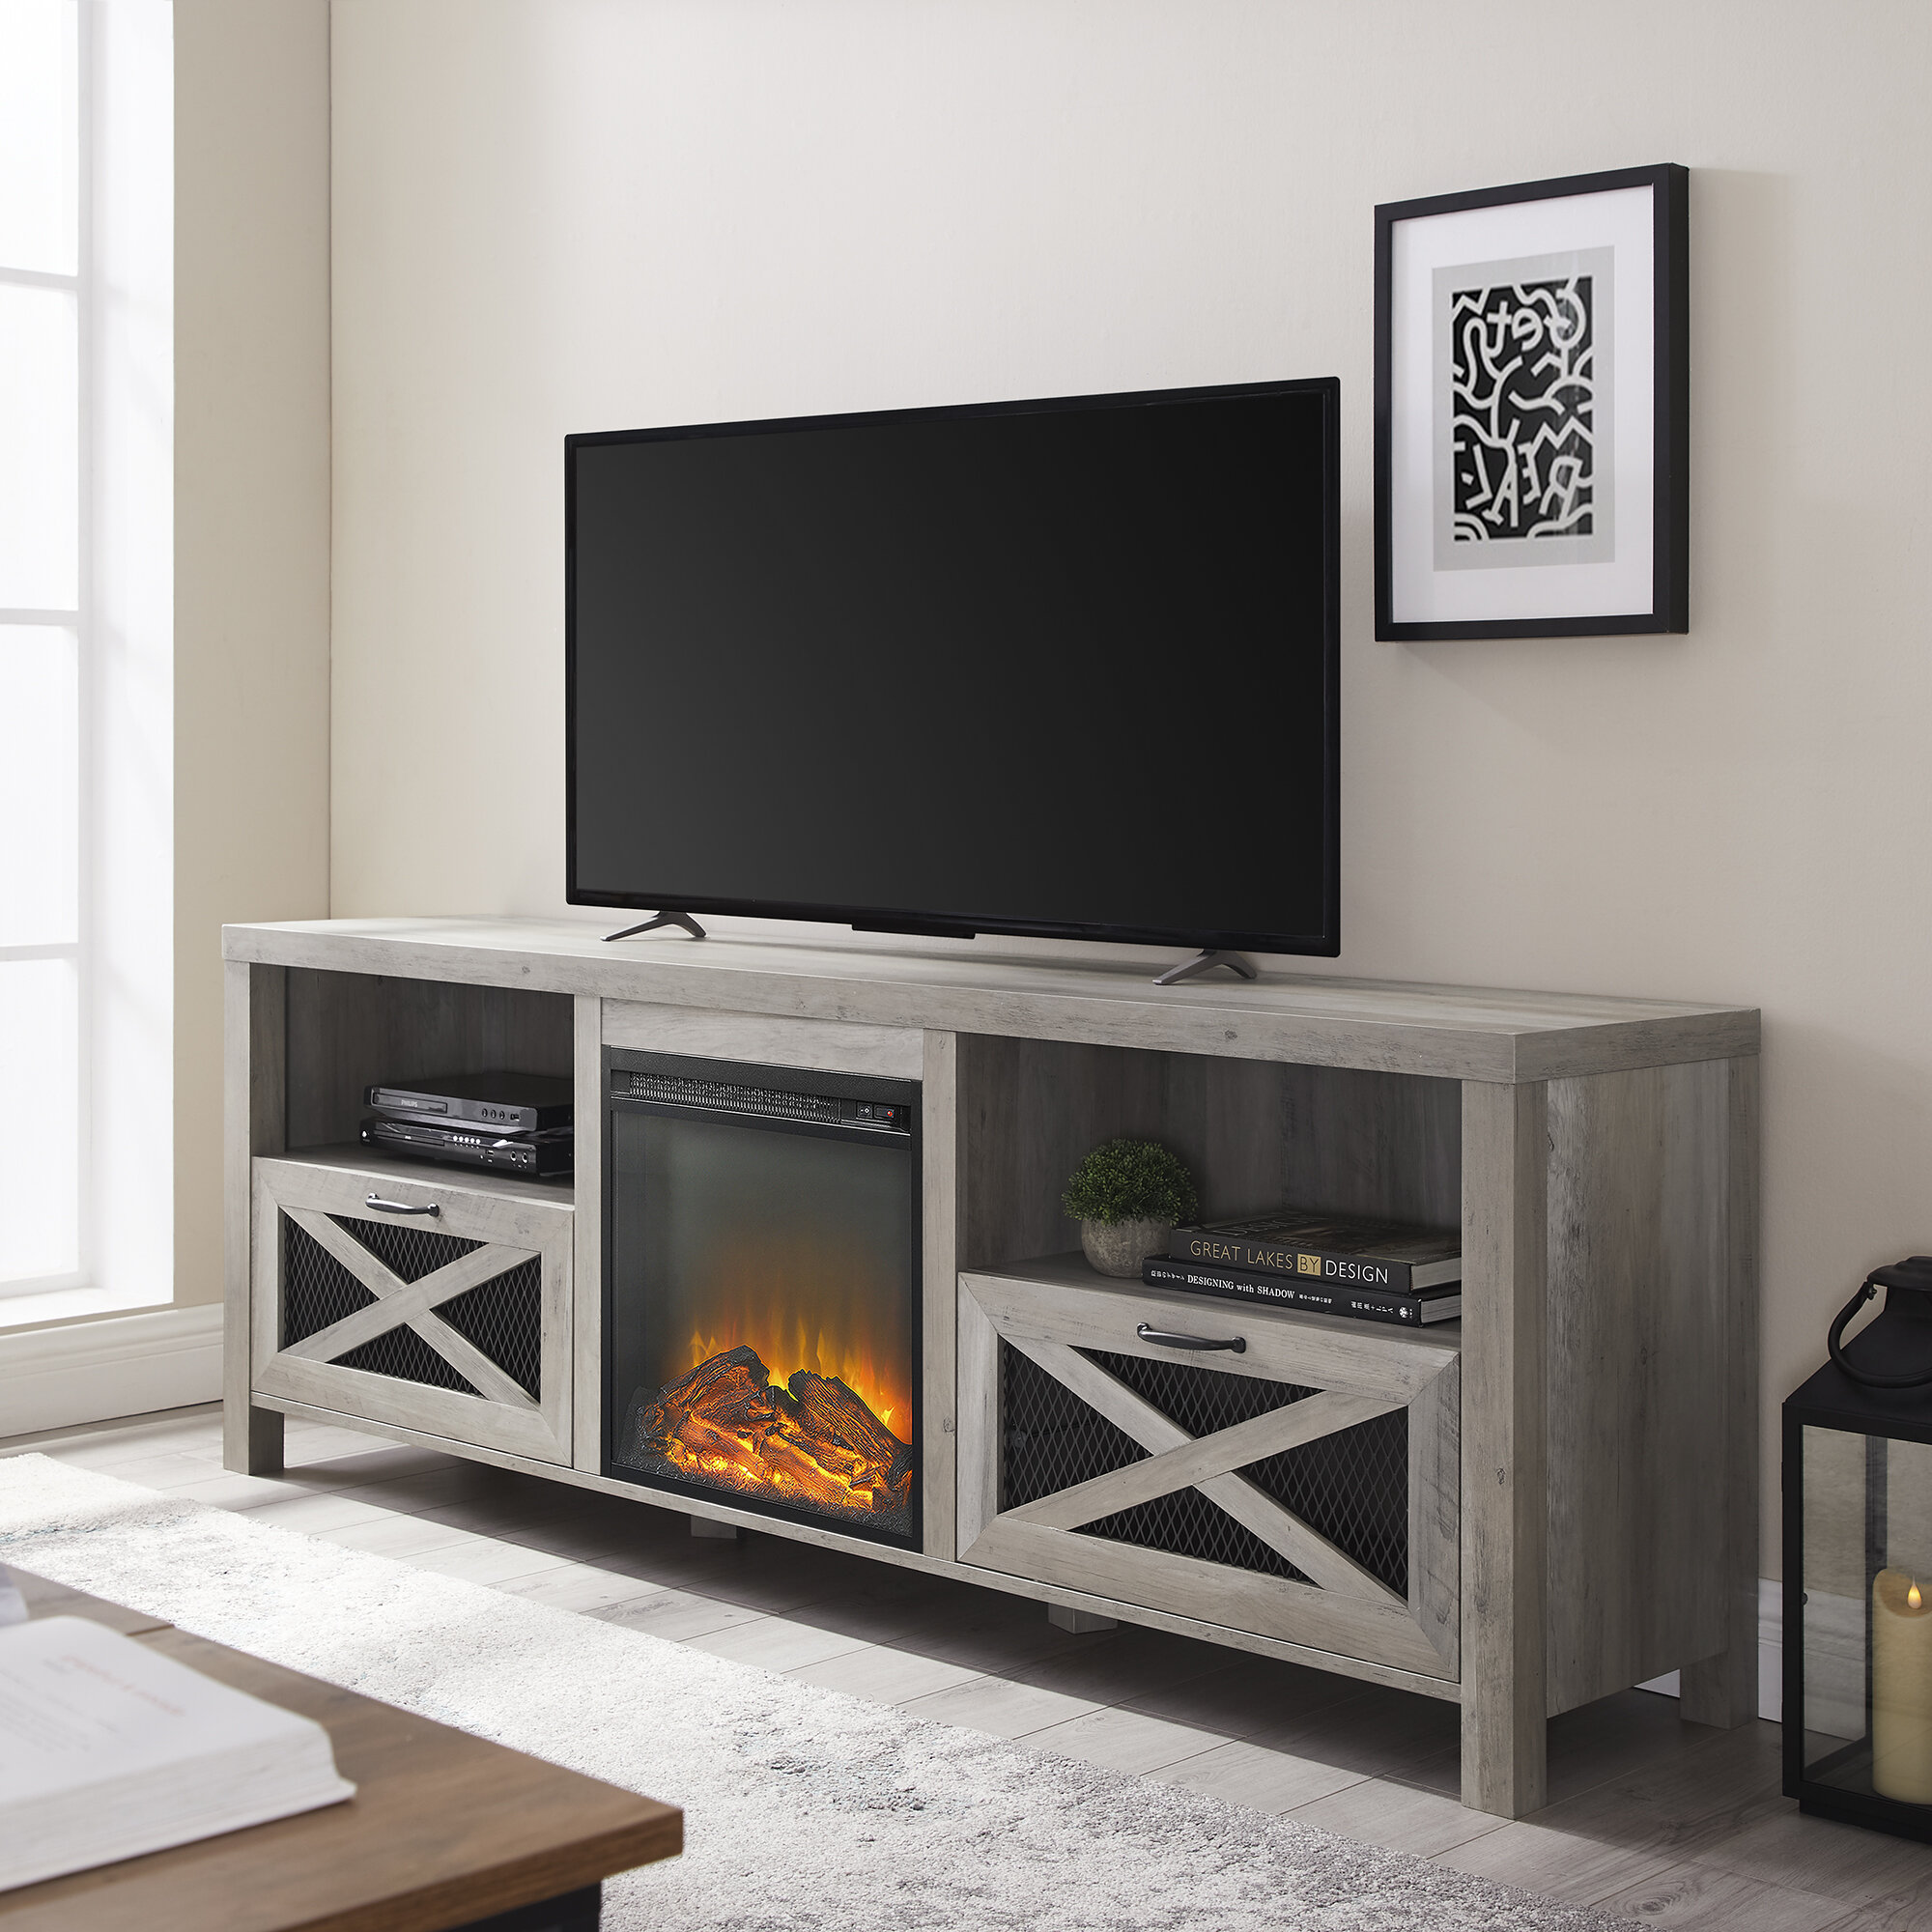 Tansey Tv Stand For Tvs Up To 78 Reviews Joss Main